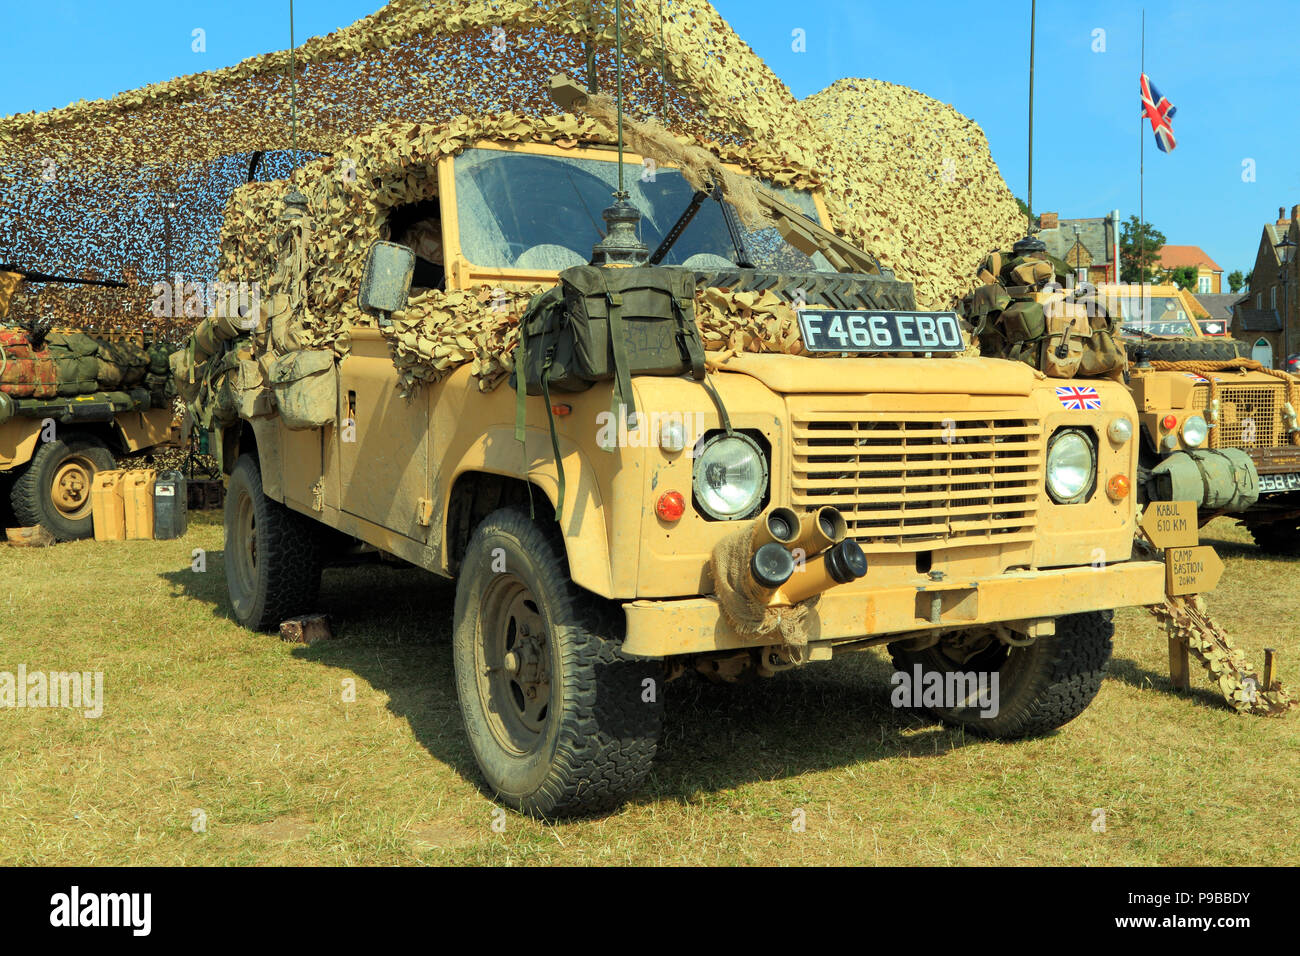 British, 1980s, Military Vehicle, Jeep, vintage, British Army, camouflage netting, tent, as served in Afghanistan War Stock Photo